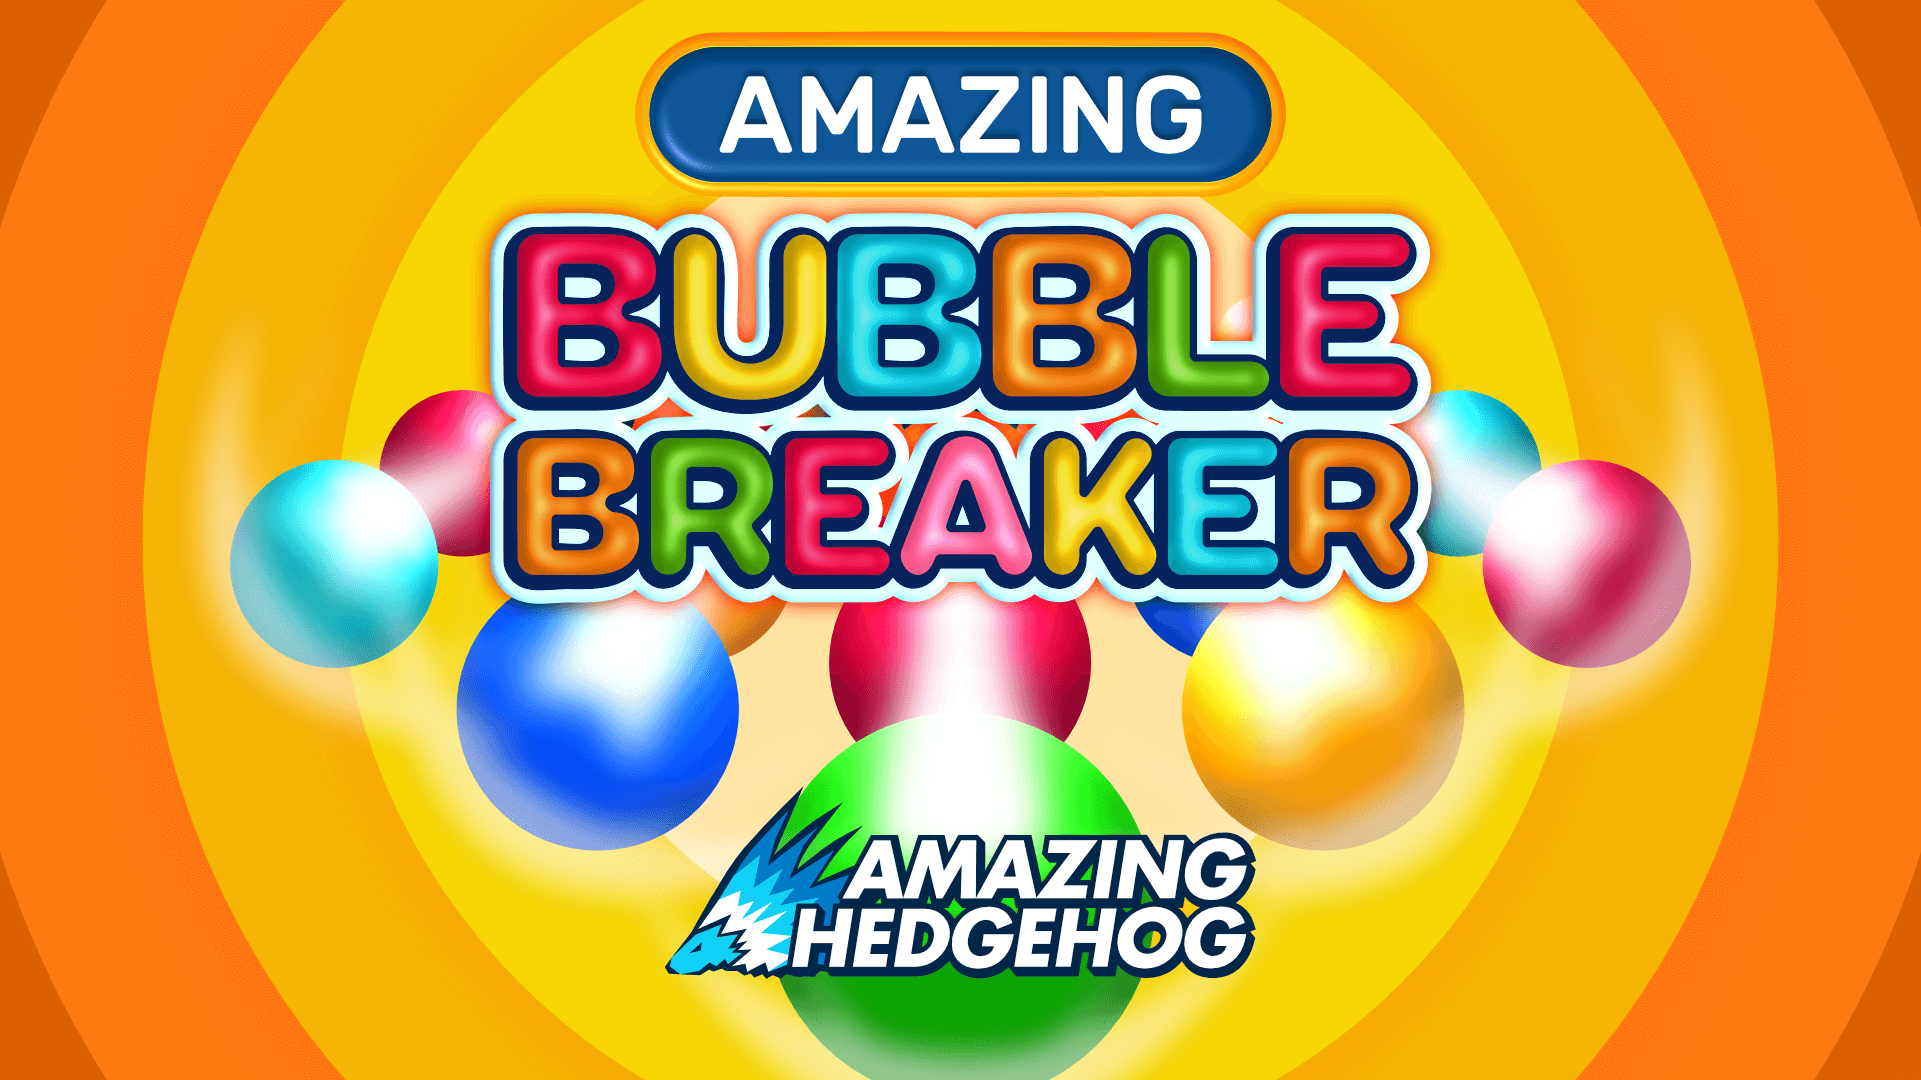 AMAZING BUBBLE BREAKER - Play Online for Free!